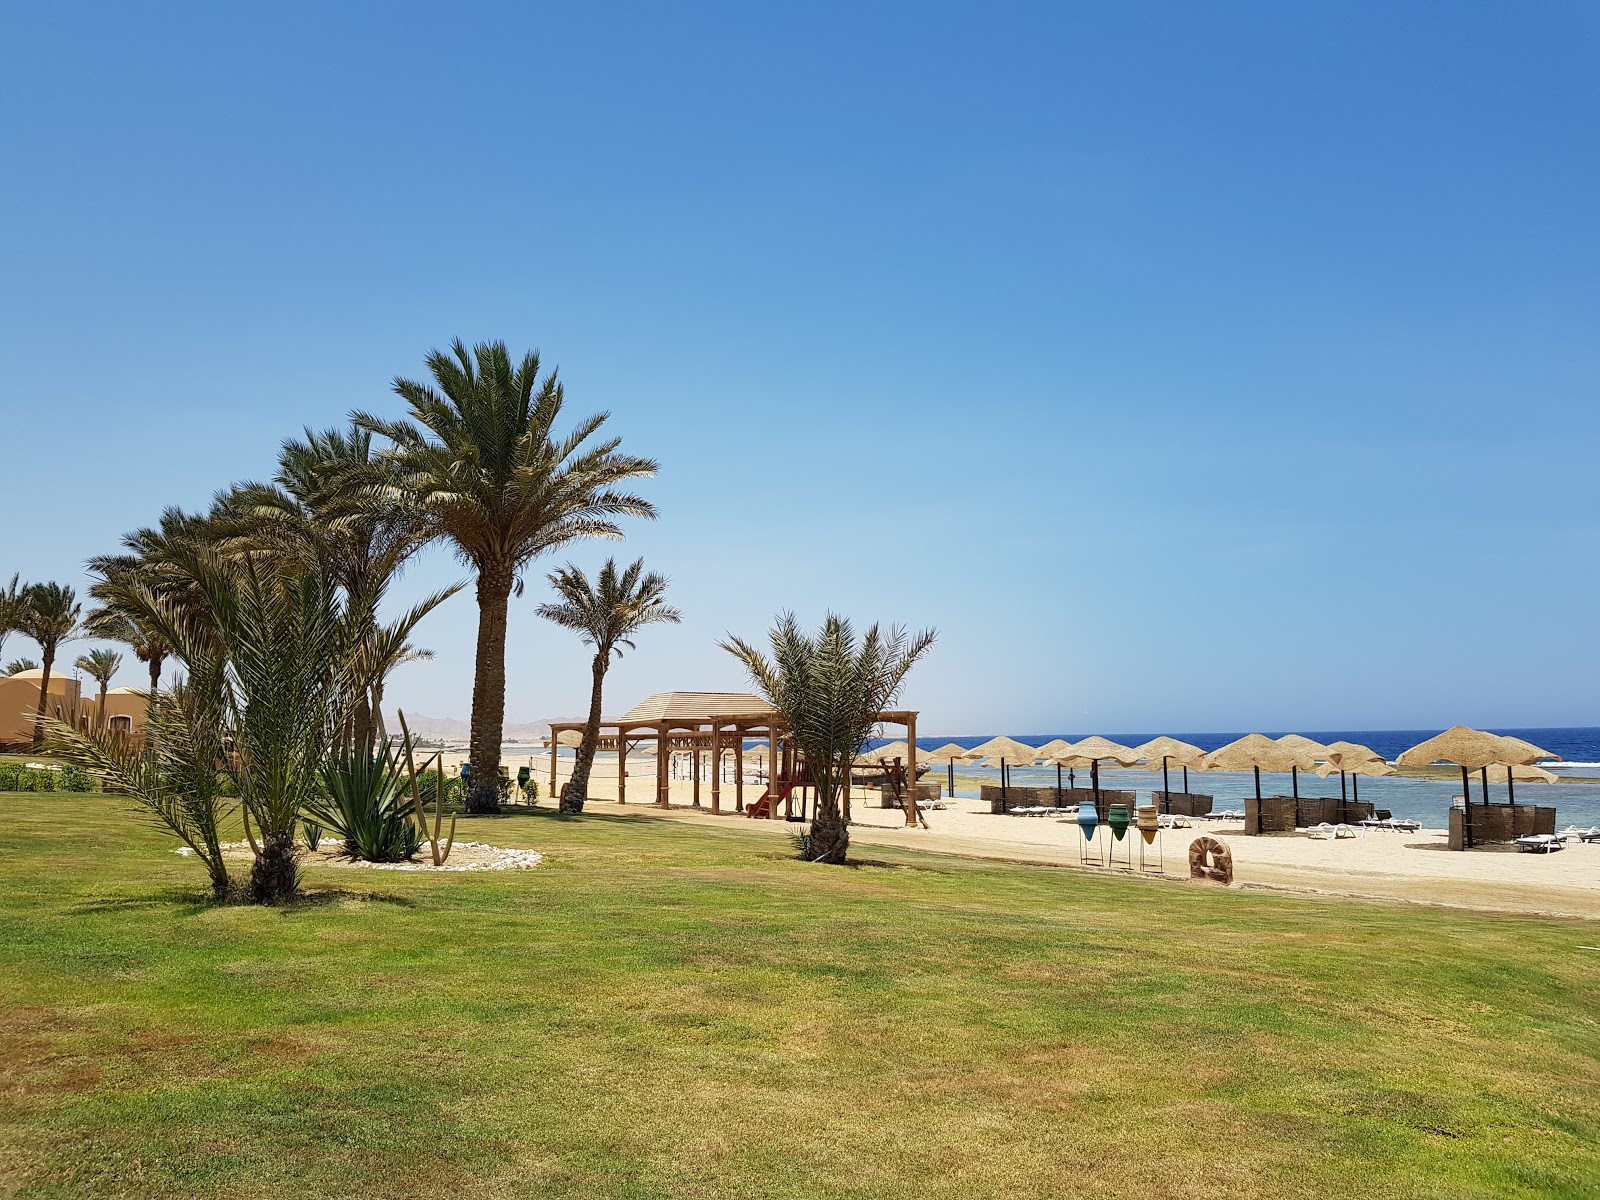 Photo of Radisson Blu Resort, El Quseir - recommended for family travellers with kids